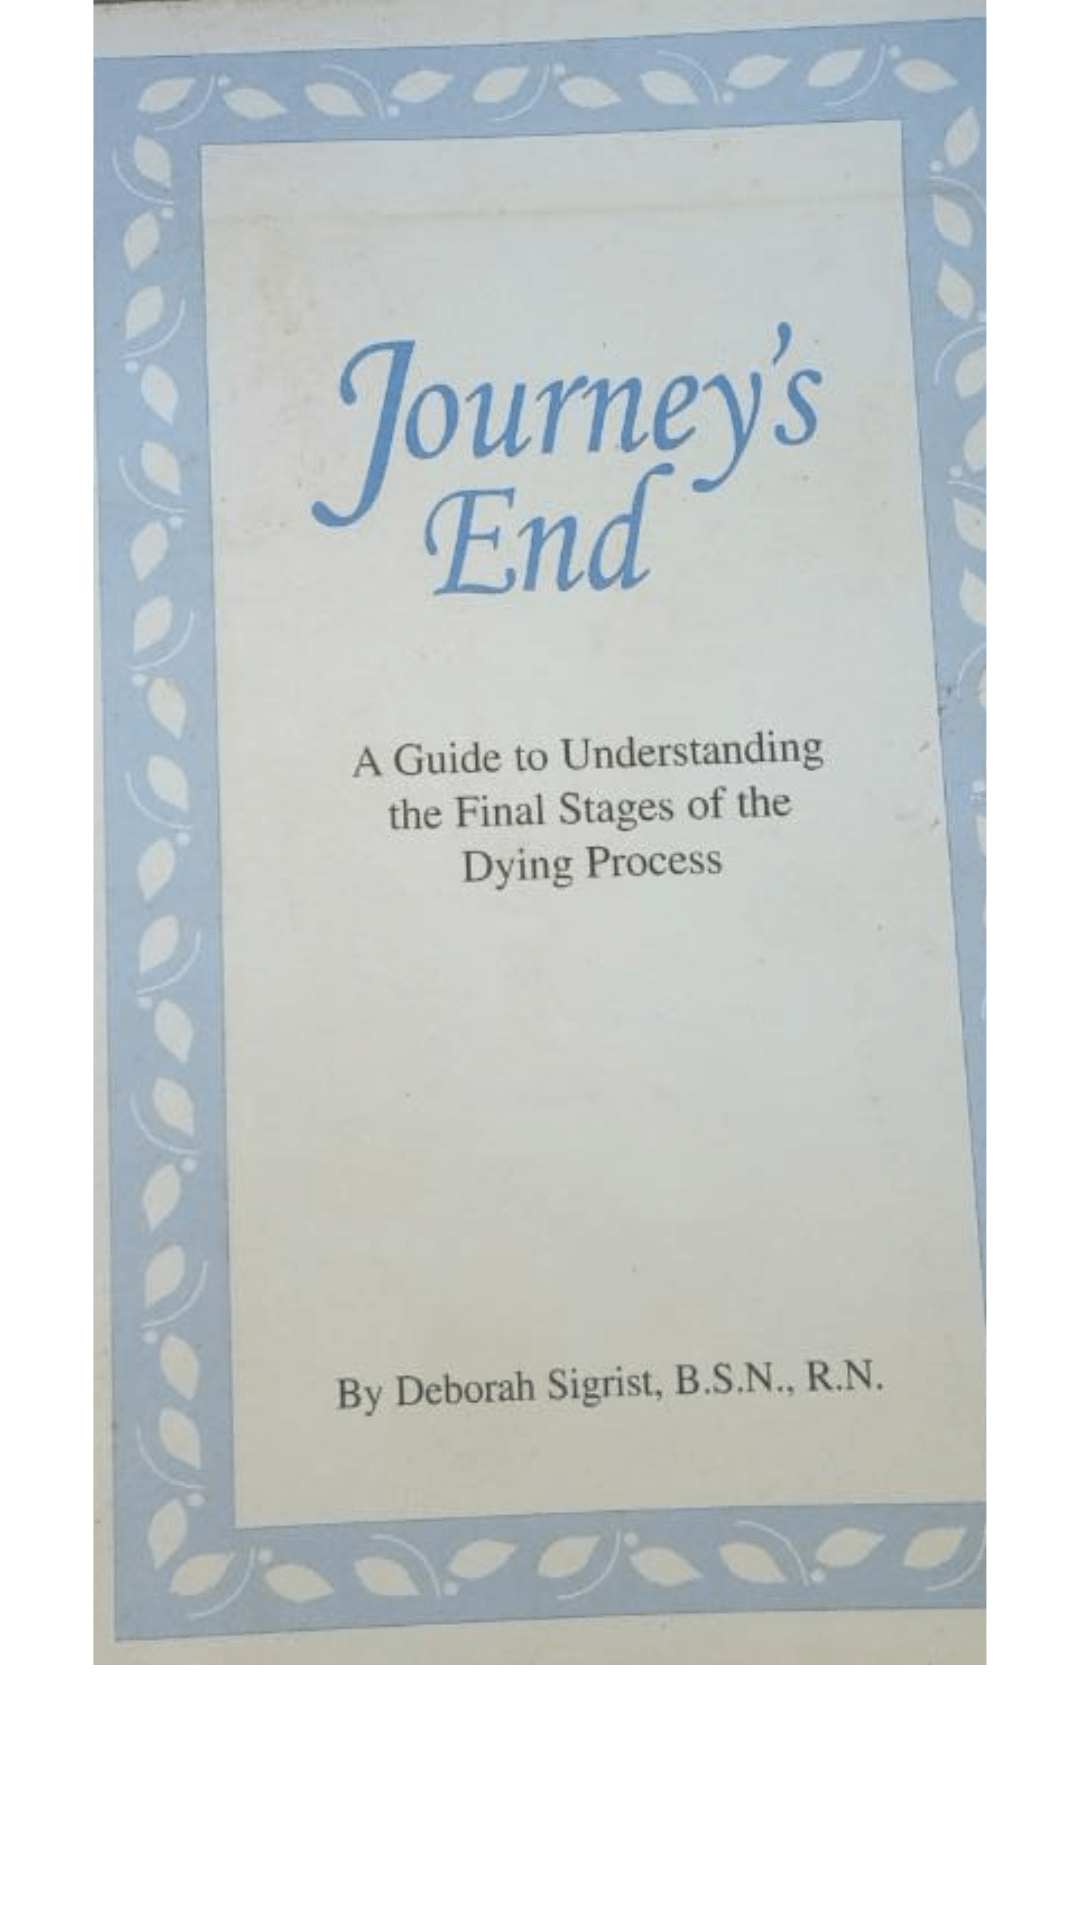 Journey's End: A Guide to Understanding the Dying Process